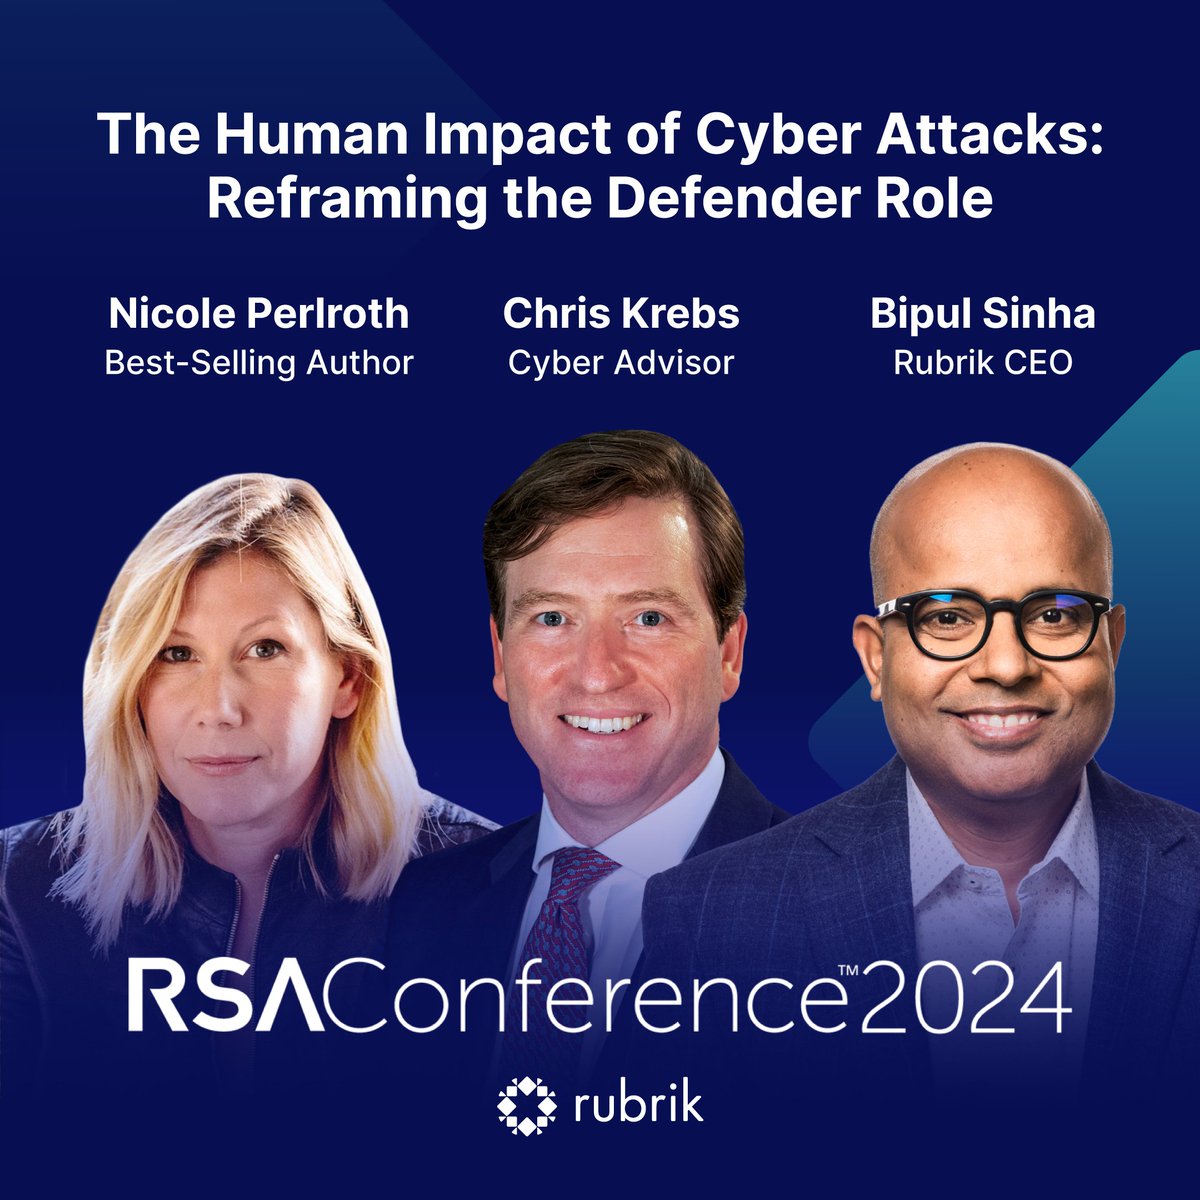 Wow, you won’t want to miss this incredible panel! Join @BipulSinha, @C_C_Krebs, and @nicoleperlroth at @RSAConference for a discussion on how CISOs and CIOs are measured in the wake of a #CyberAttack: rbrk.co/4asuSB3 #CyberSecurity